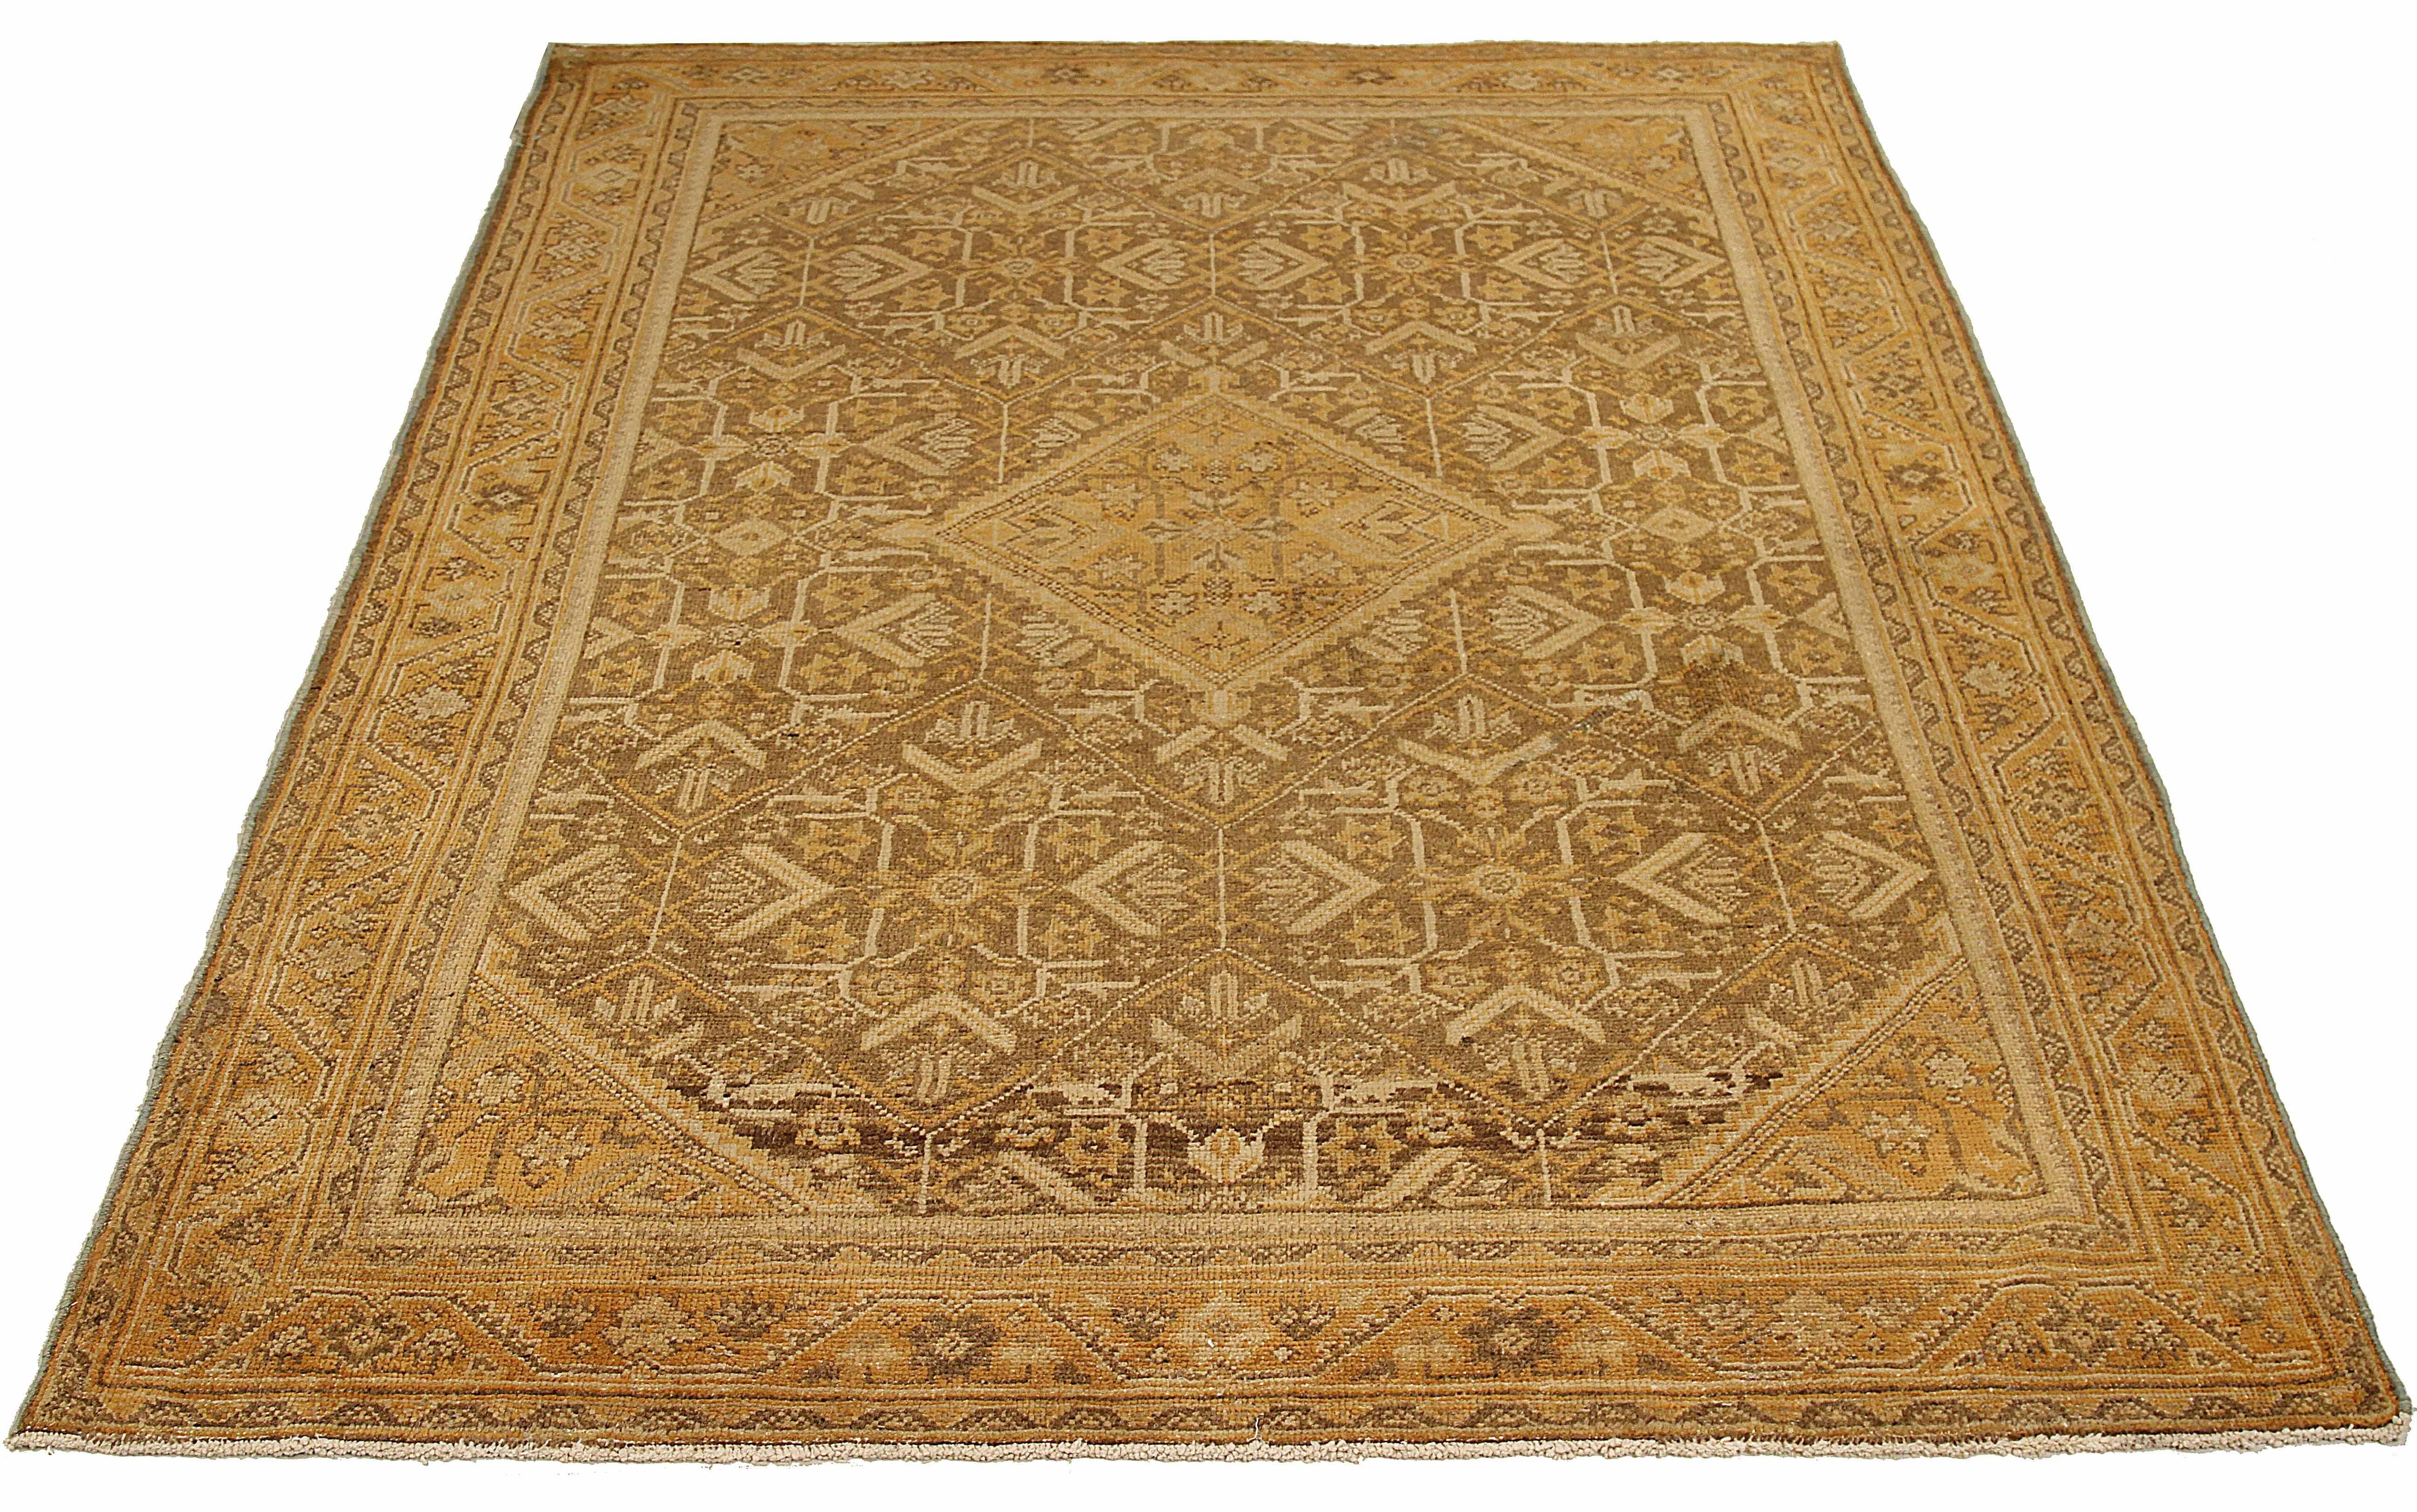 Antique Persian area rug handwoven from the finest sheep’s wool. It’s colored with all-natural vegetable dyes that are safe for humans and pets. It’s a traditional Meshkabad design handwoven by expert artisans. It’s a lovely area rug that can be